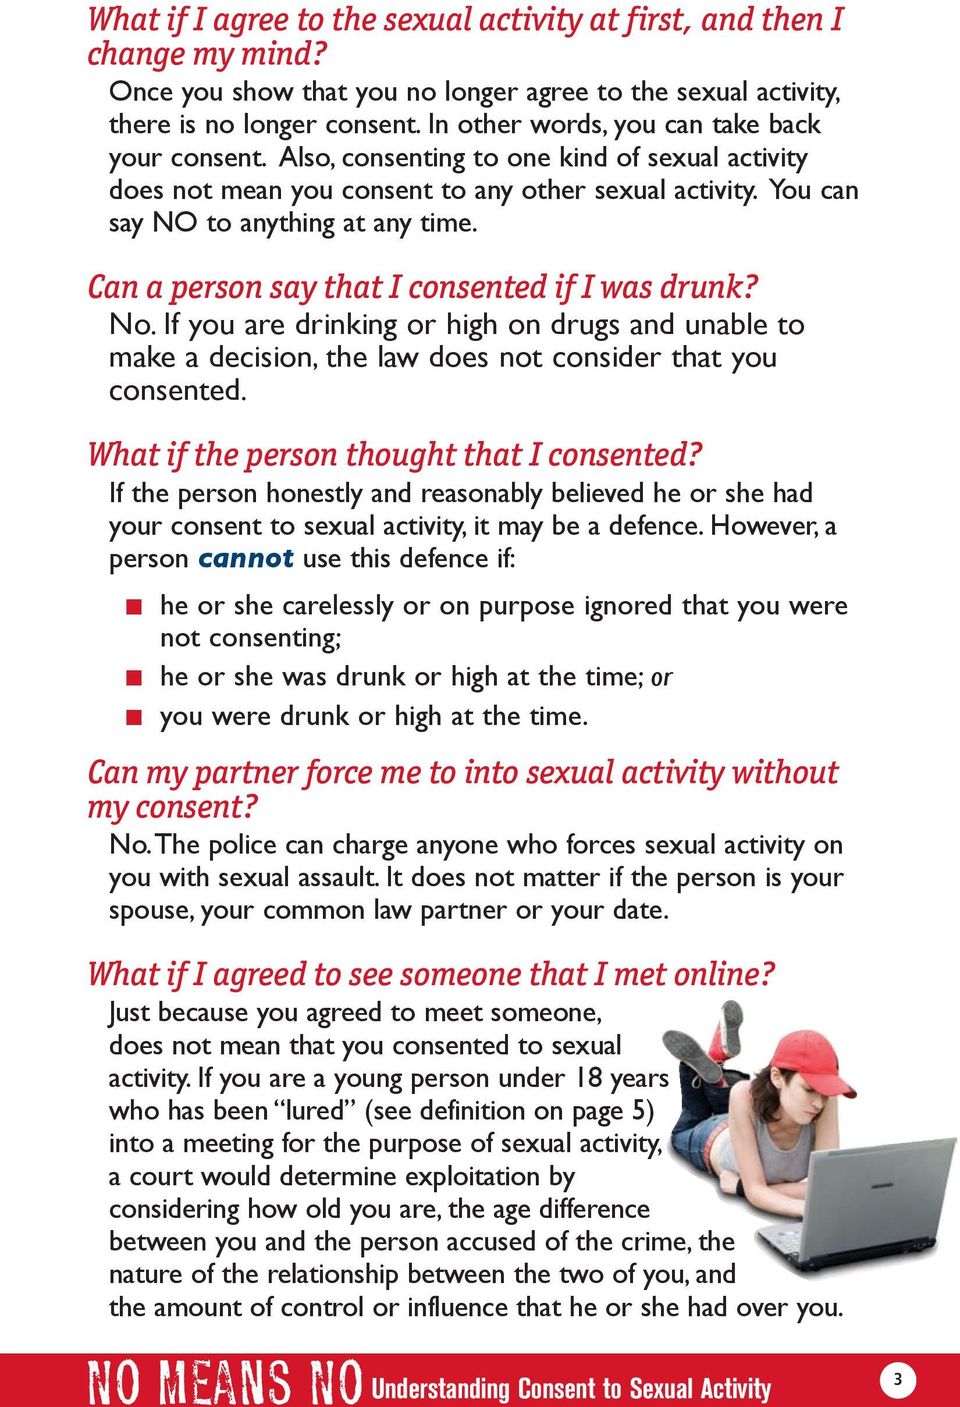 Can a person say that I consented if I was drunk? No. If you are drinking or high on drugs and unable to make a decision, the law does not consider that you consented.